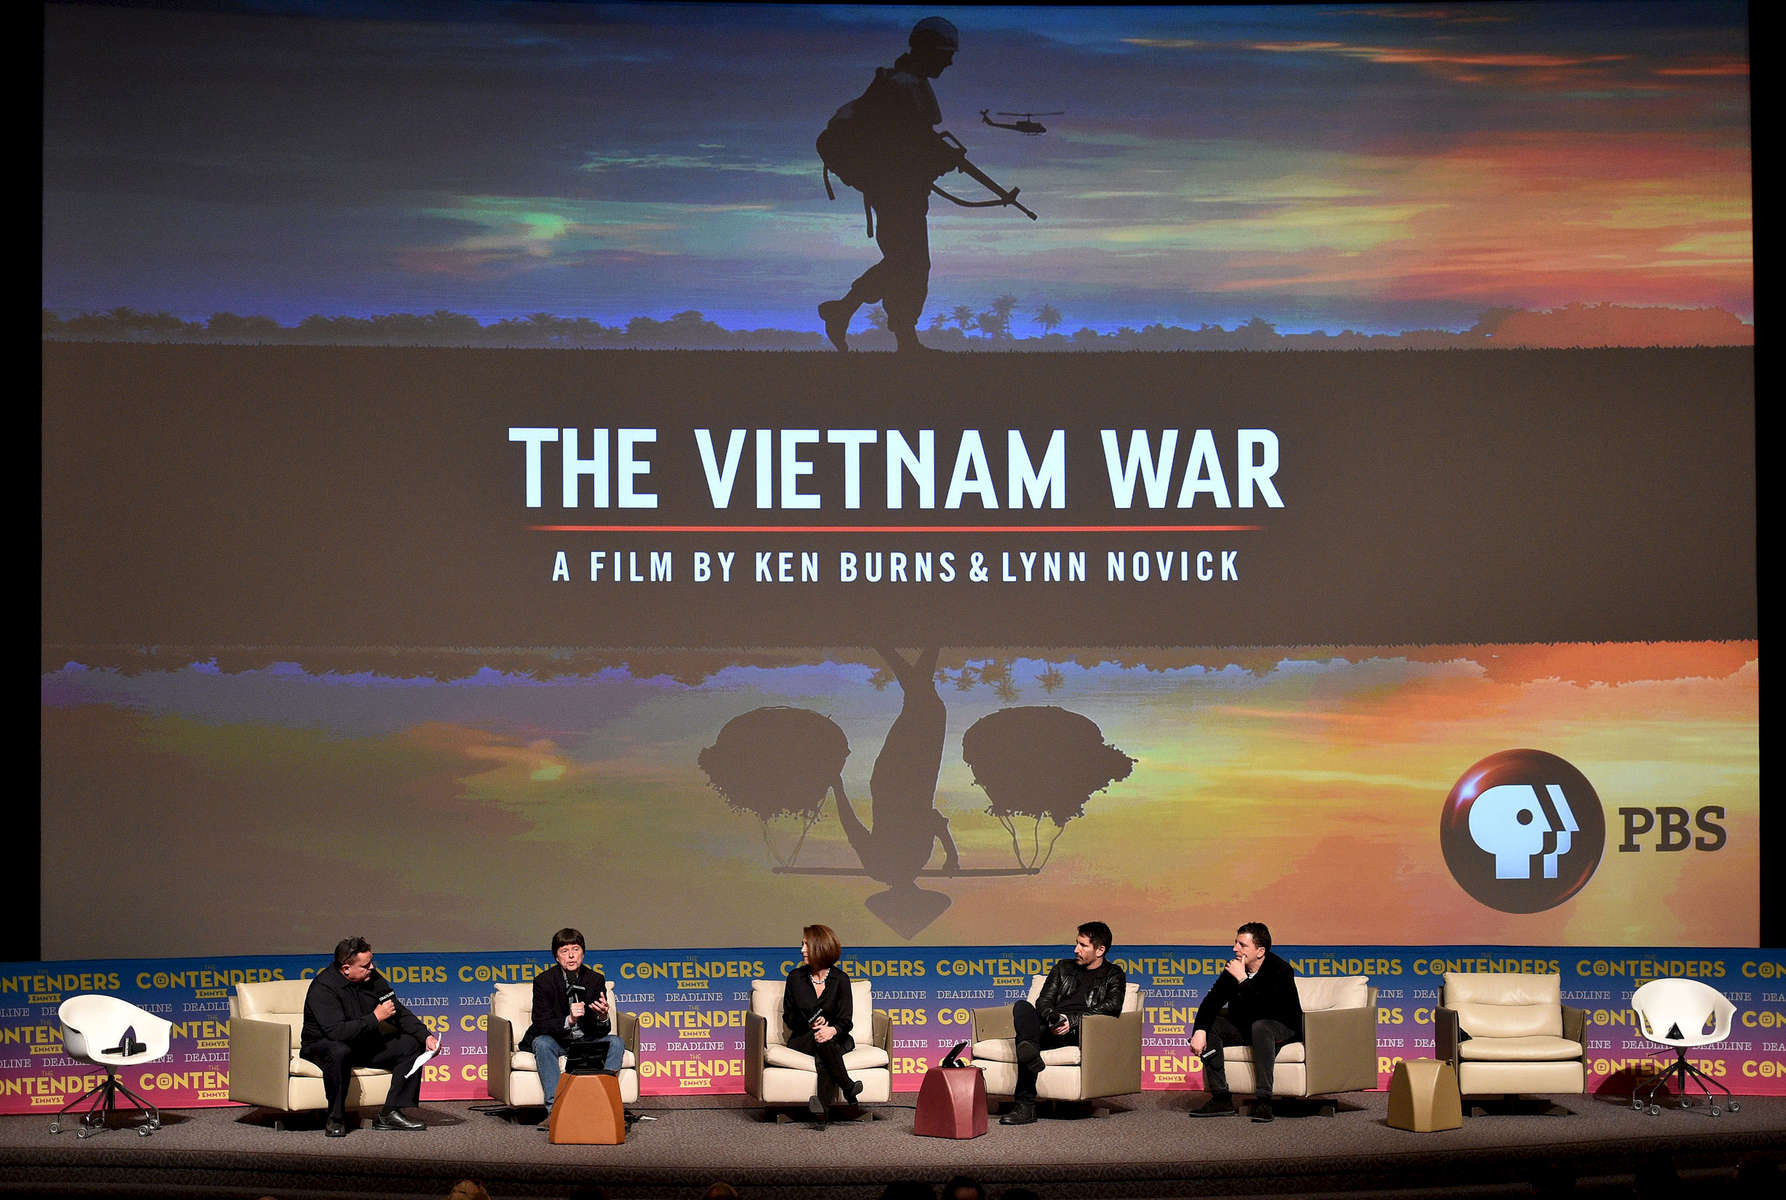 Mandatory Credit: Photo by Stewart Cook/Deadline/REX/Shutterstock (9629827n)Mike Fleming, Ken Burns, Lynn Novick, Trent Reznor and Atticus RossPBS 'The Vietnam War' presentation, The Contenders Emmys presented by Deadline Hollywood, Los Angeles, USA - 15 Apr 2018